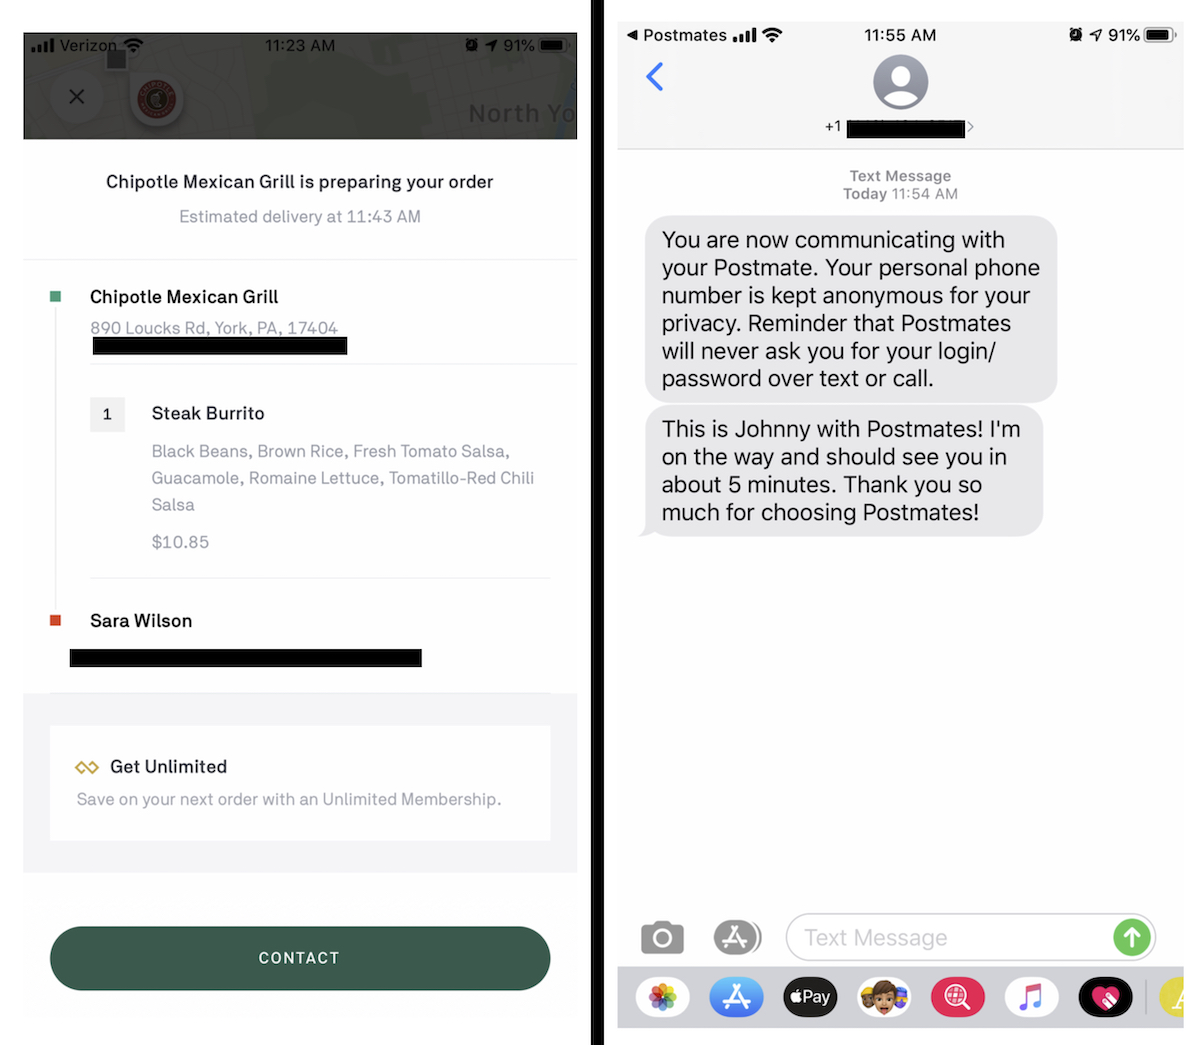 screenshots of postmates app with chipotle order on screen